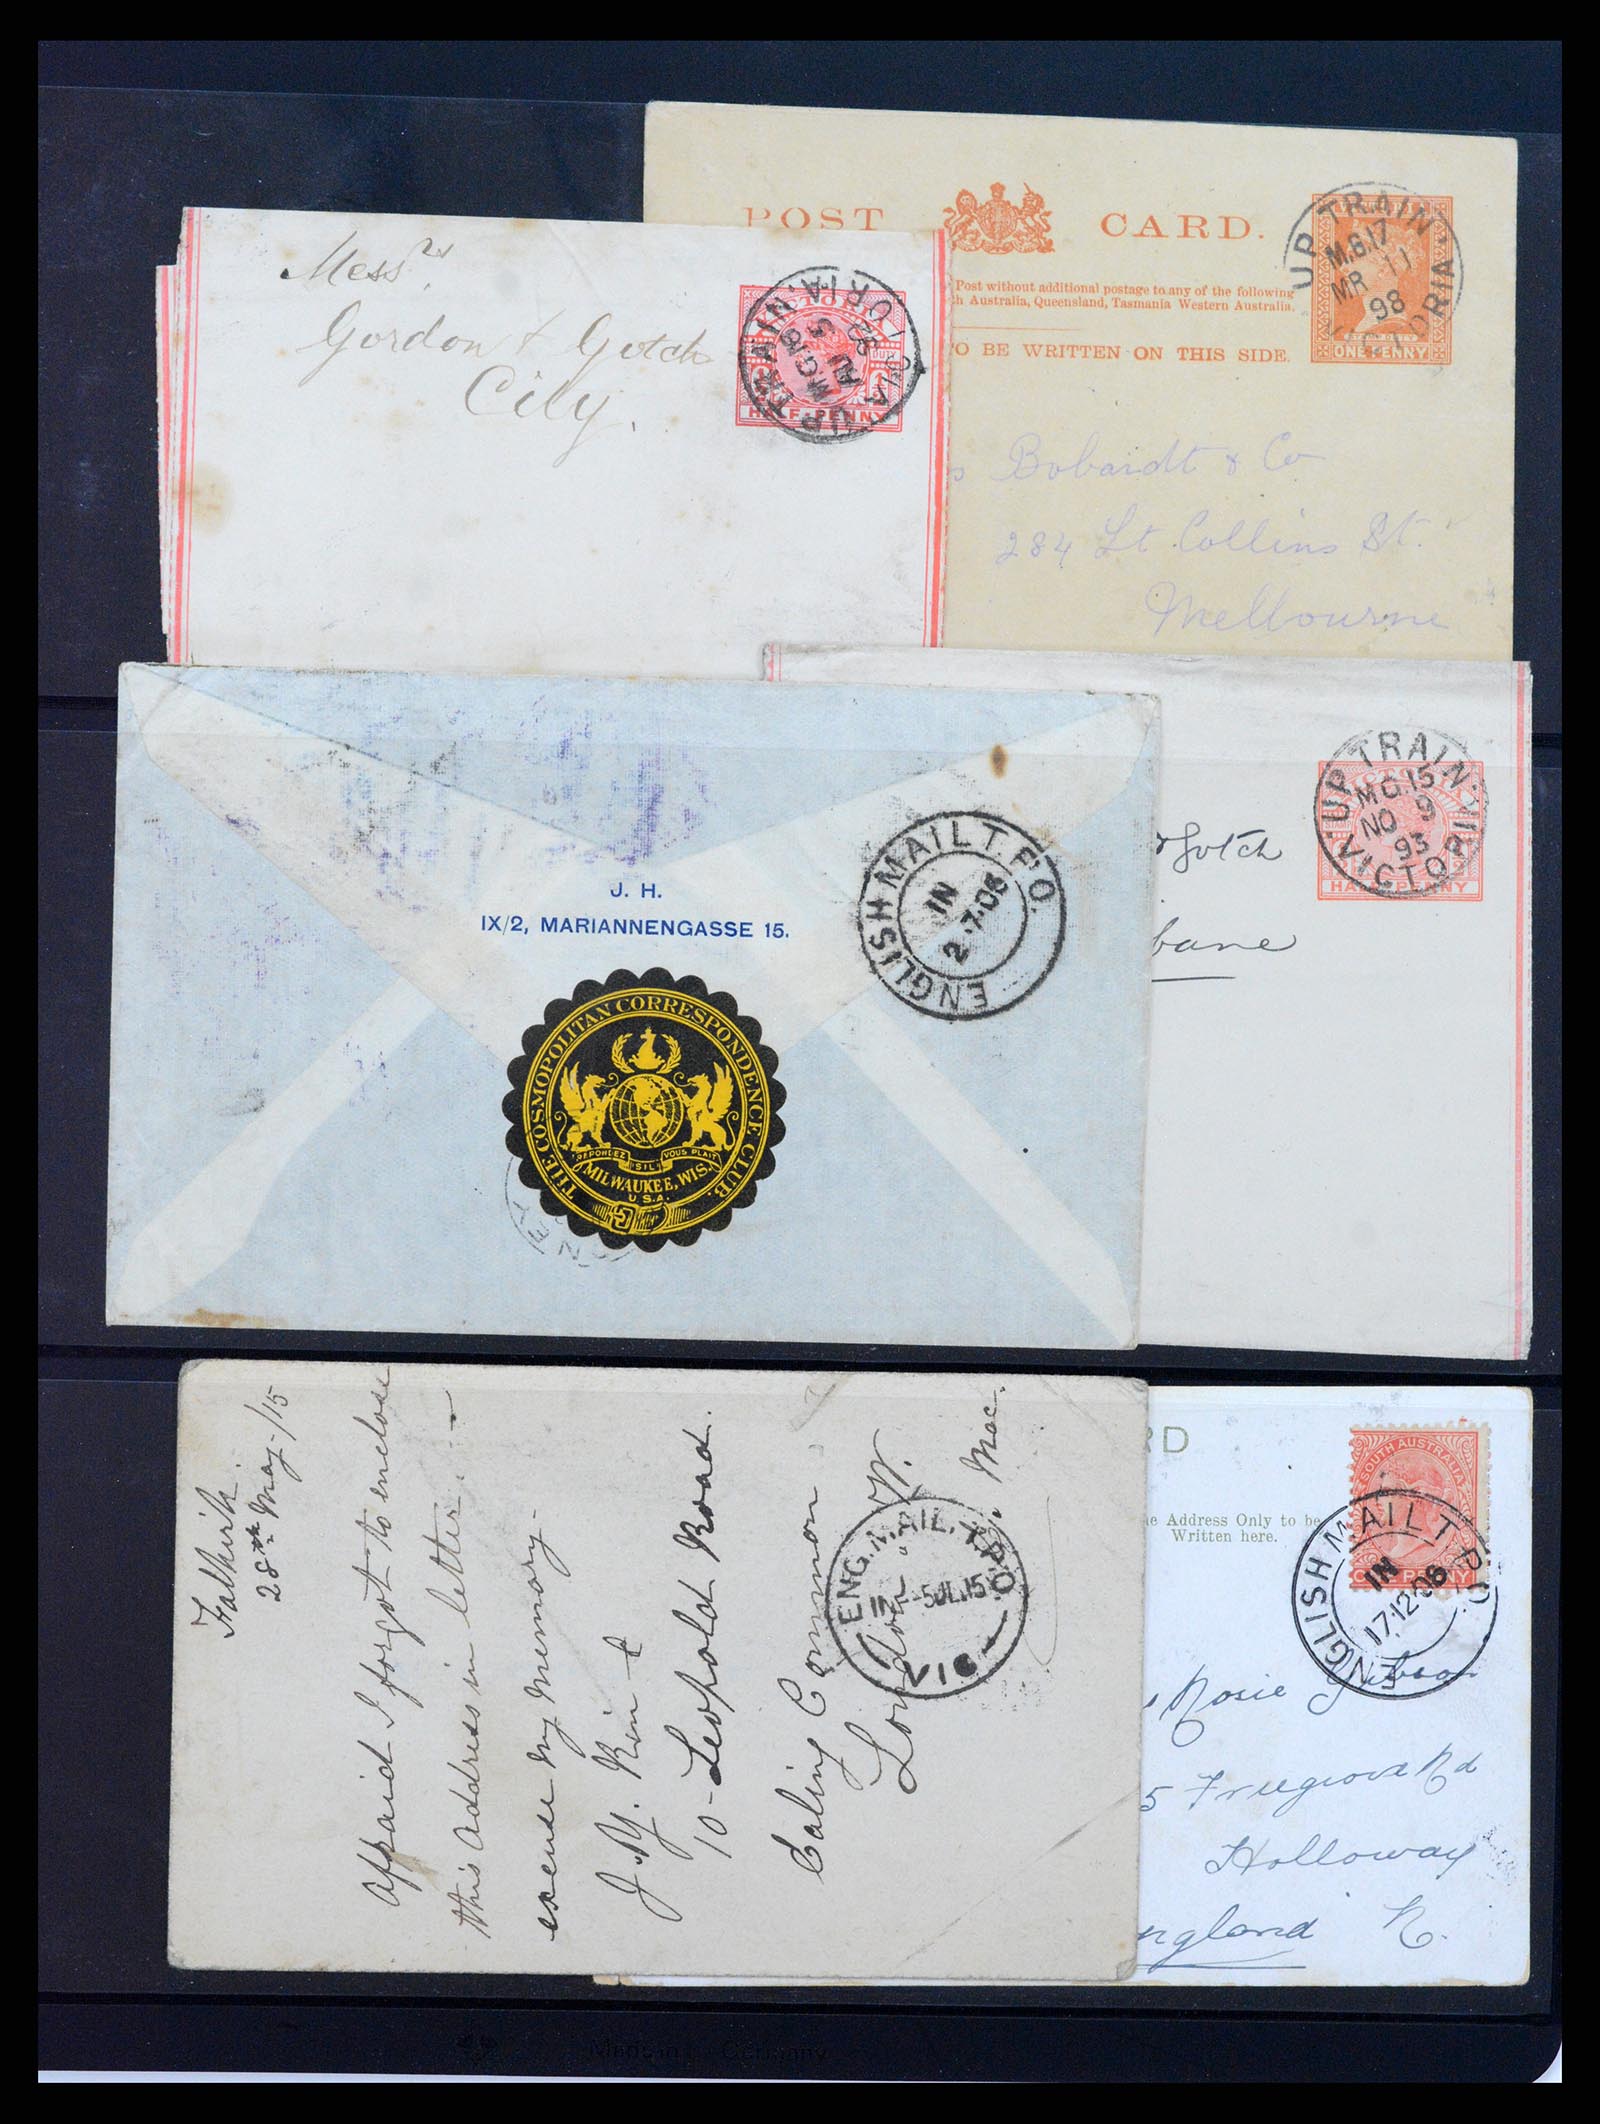 37514 036 - Stamp collection 37514 Victoria tpo cancellations 1865-1930.